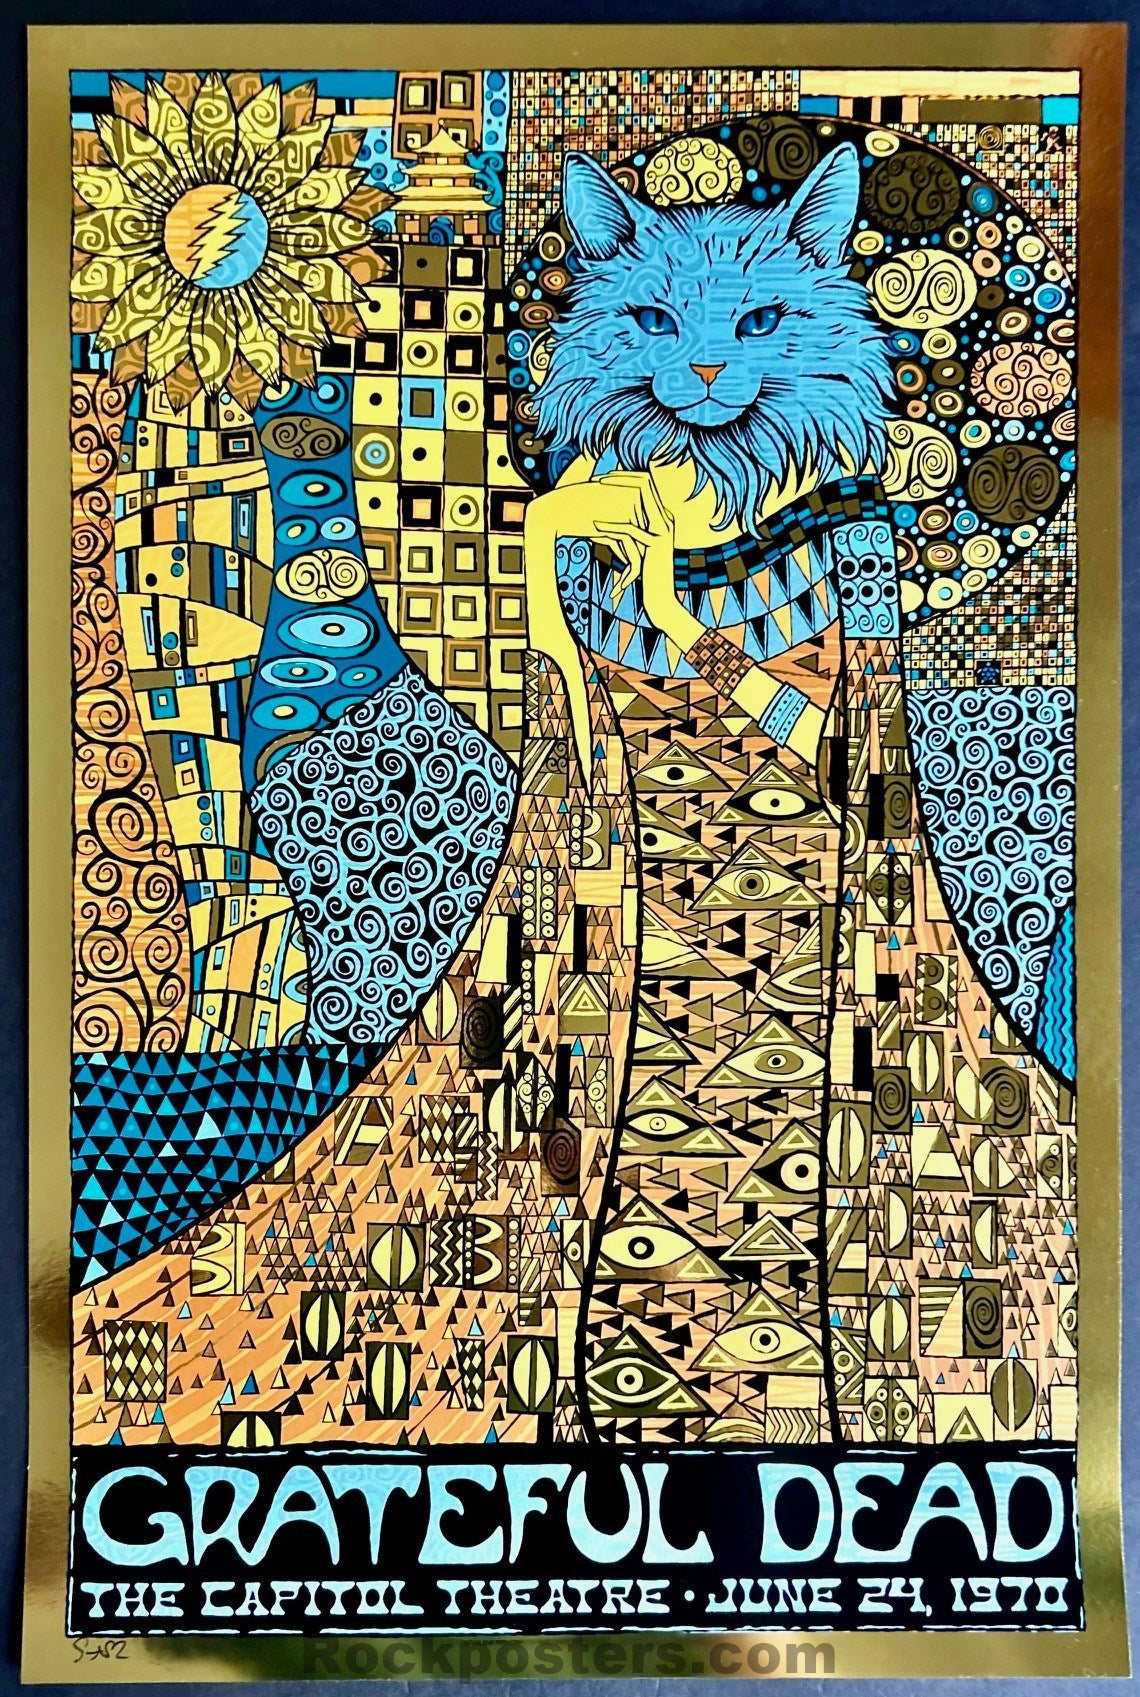 AUCTION - Grateful Dead - China Cat Sunflower '24 - Todd Slater - Gold Mirror Foil Poster - Edition of 25 - Mint